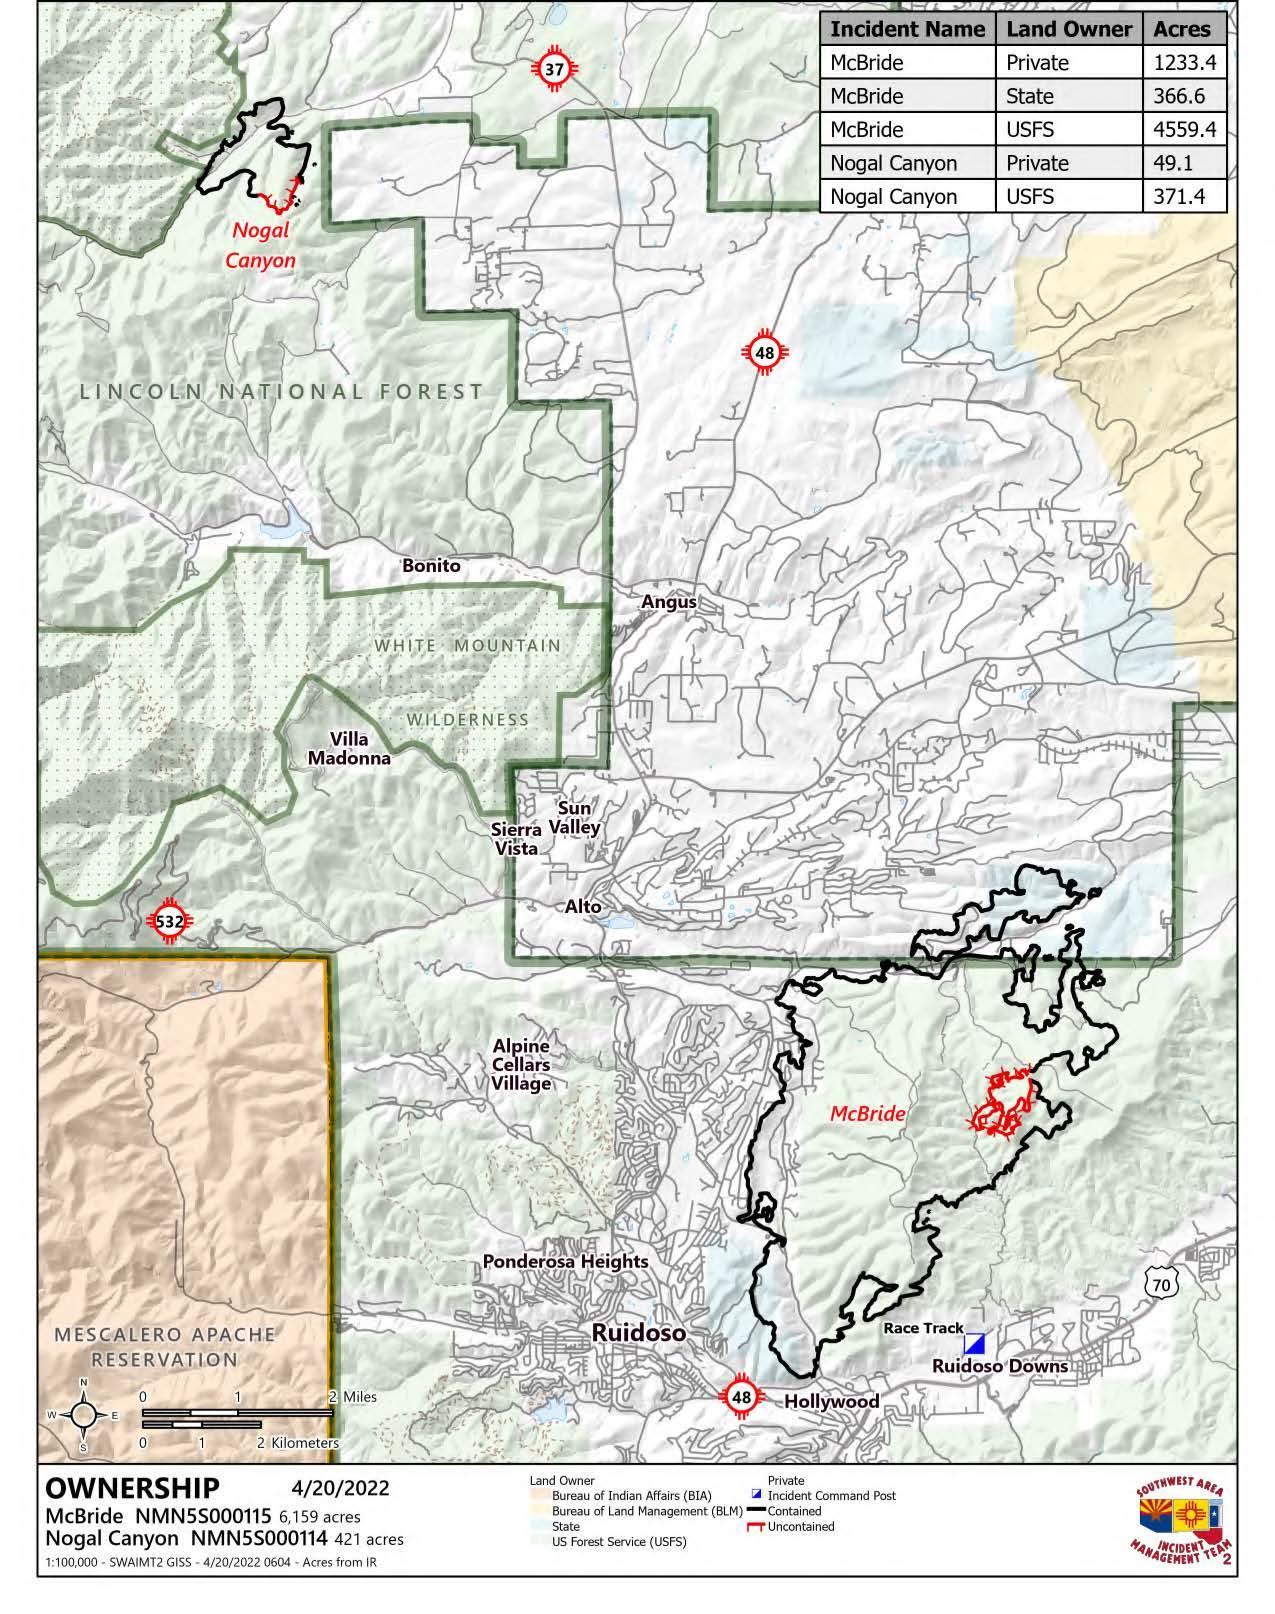 Nogal Canyon Fire Ownership Map